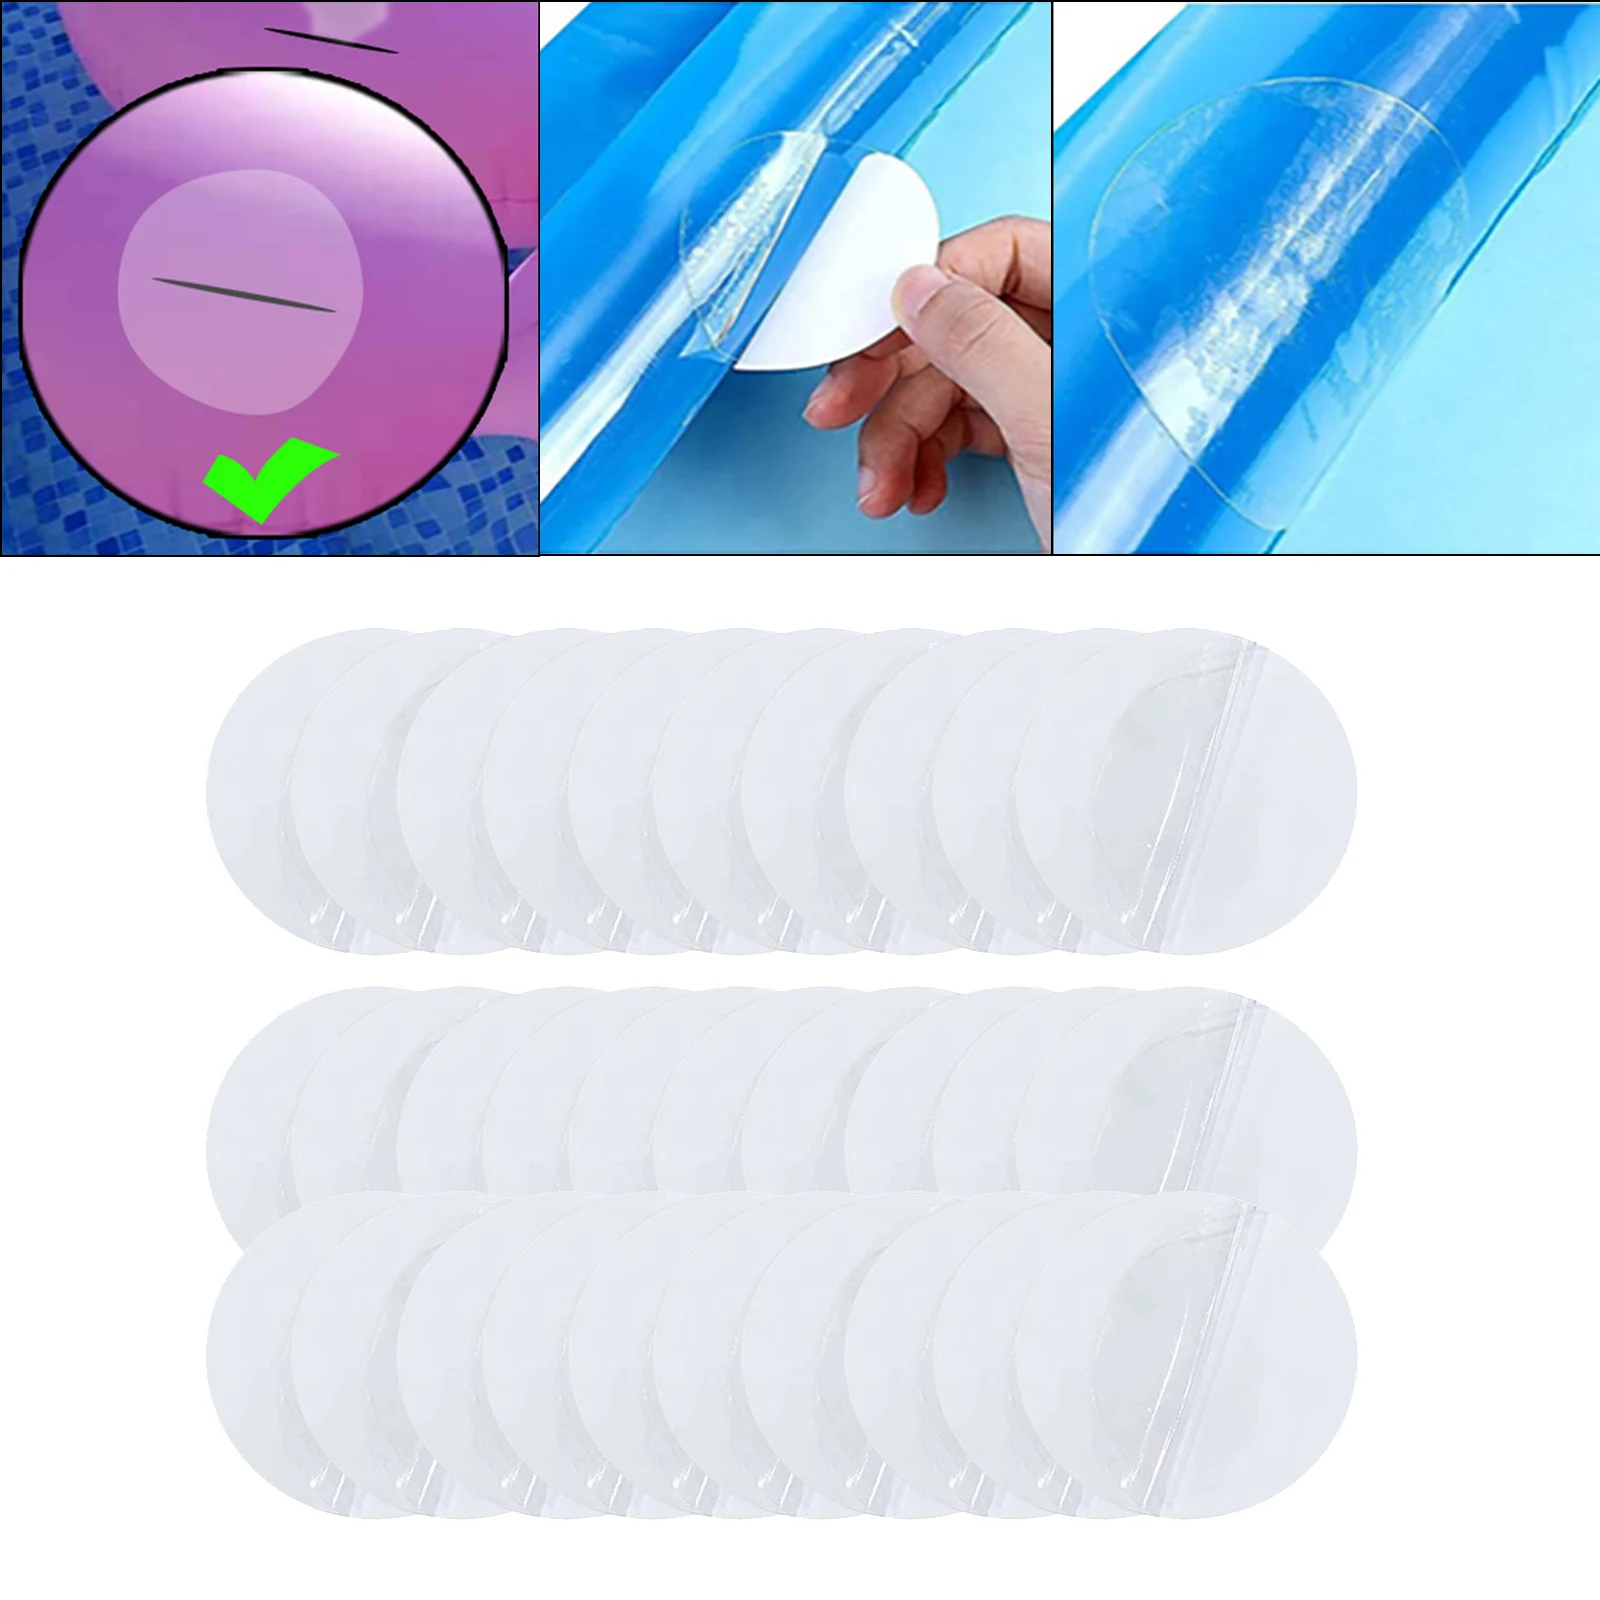 Self-Adhesive Repair Patches Tape 1-Roll Waterproof Pool Liner Patch for Inflatable Pool Boat Toys Trampoline Swimming Ring Balloon Betorcy J1 Pool Patch Kit Heavy Duty Patch & Seal Tape 2” x 59‘ 